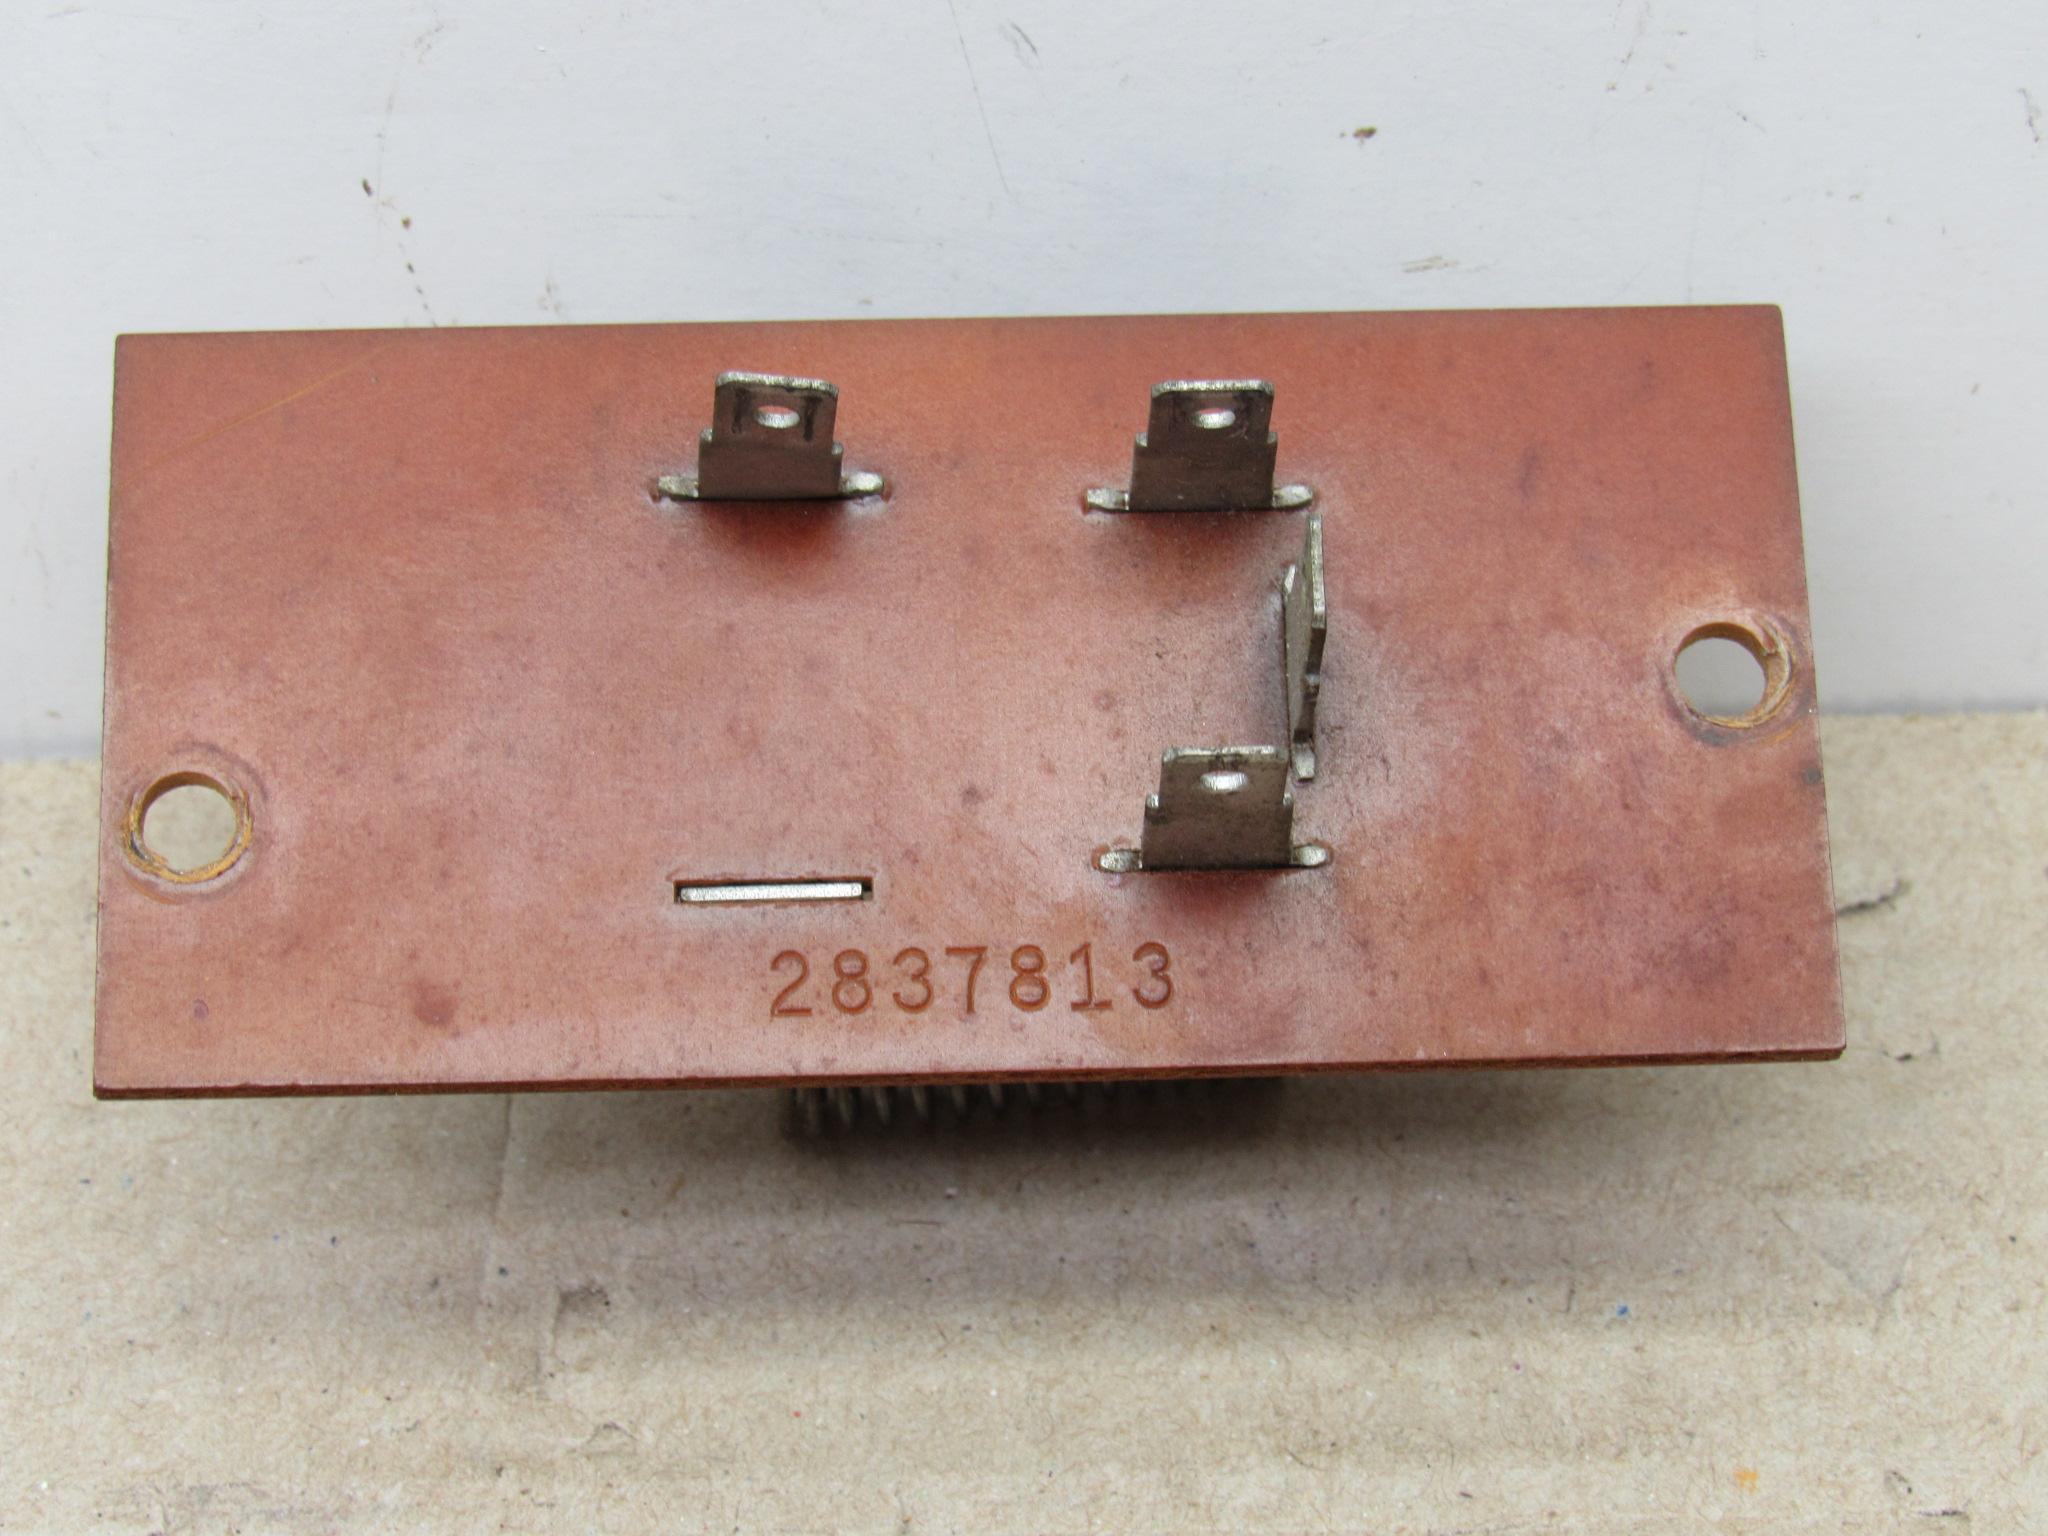 A/C and Heater Blower Motor Resistor# 2837813 - B - Body - 1968-70 - USED -  SHIPS FREE TO LOWER 48 - Blue Star Performance